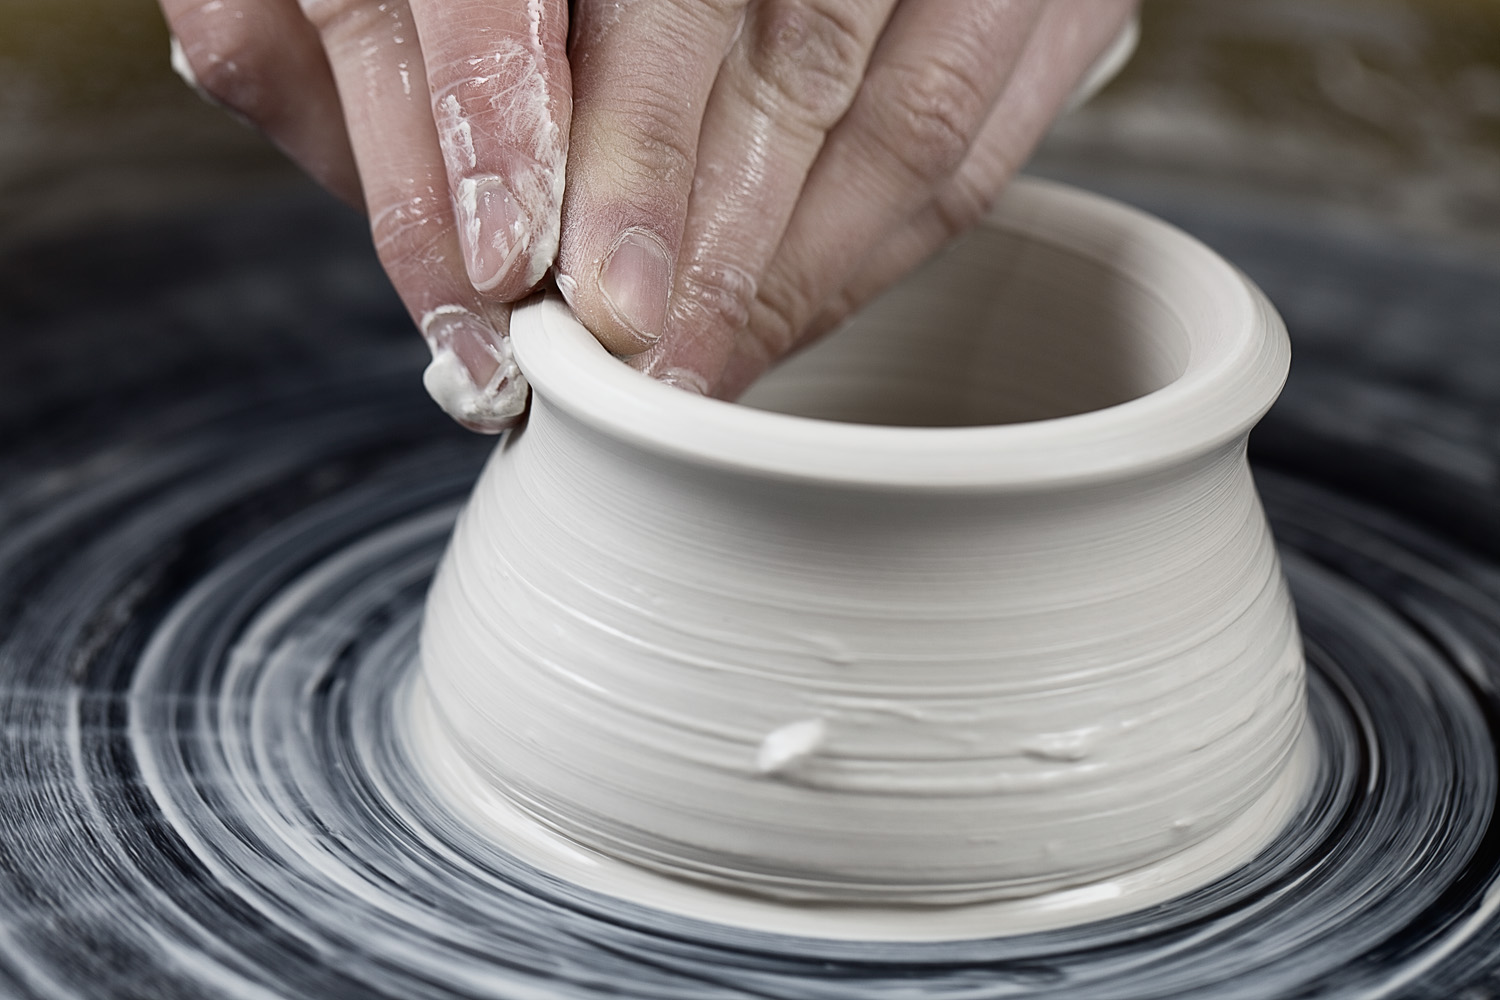 Lifestyle photography of forming clay pot on pottery wheel at ceramics studio